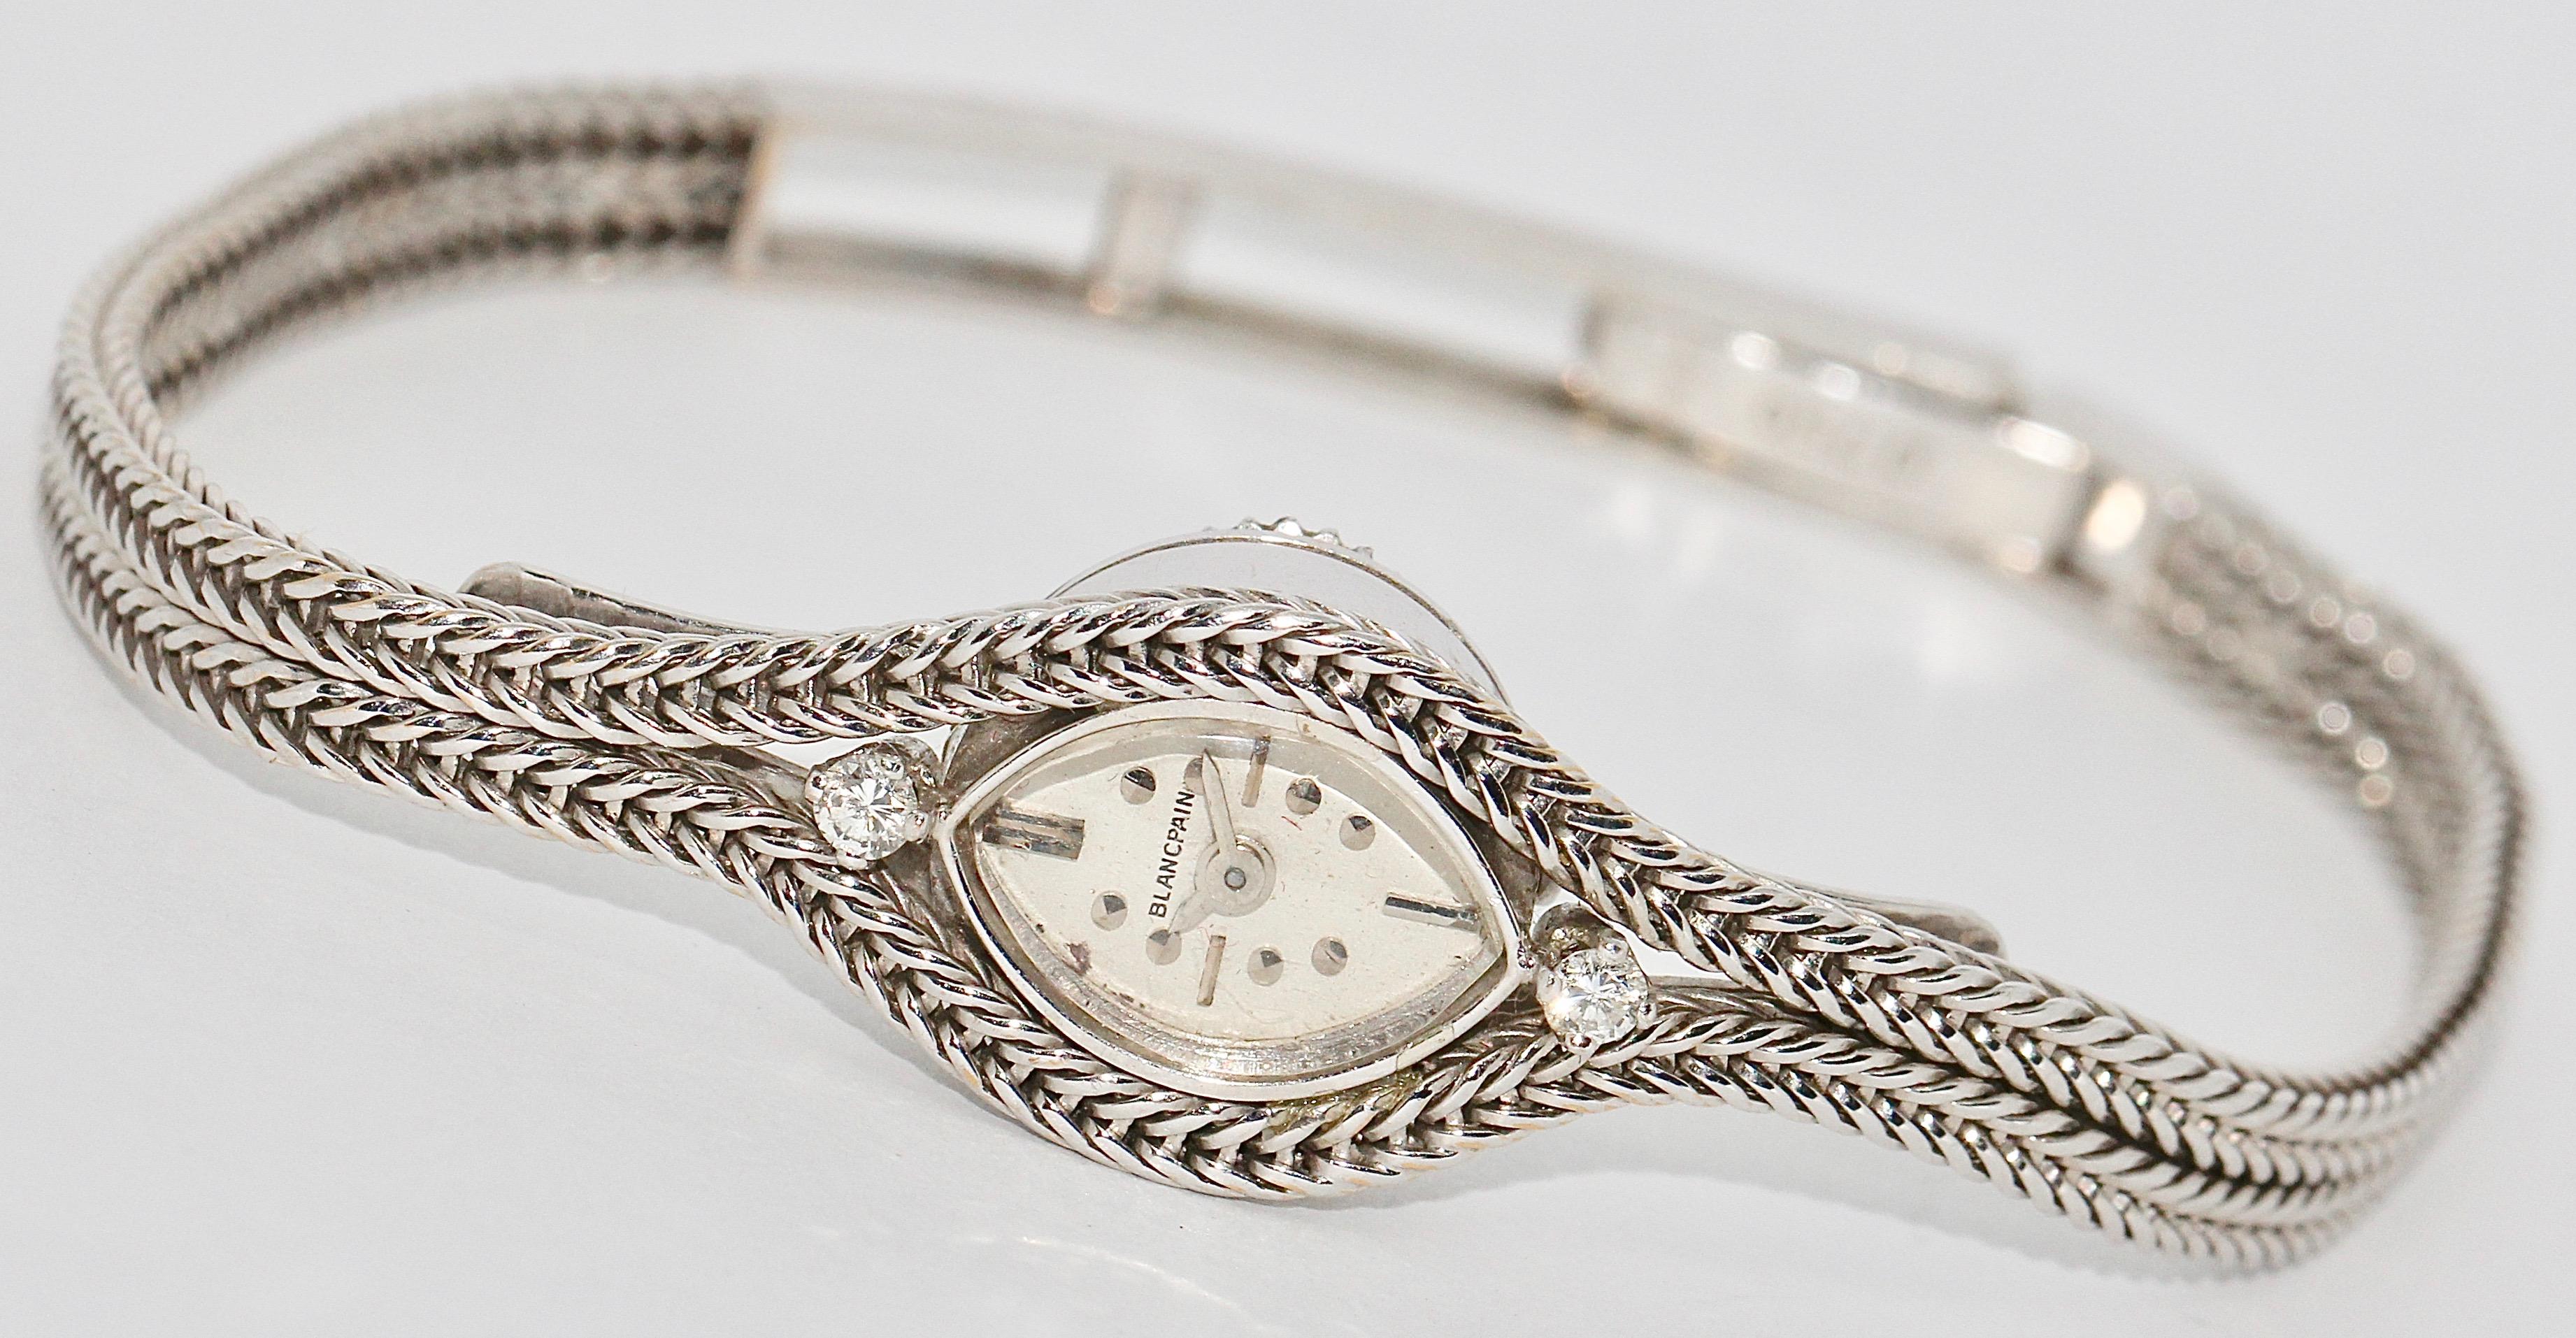 Elegant, dainty Ladies Wristwatch by Blancpain, 18 Karat white Gold with Diamonds, manual wind.

The watch comes with a certificate of authenticity.